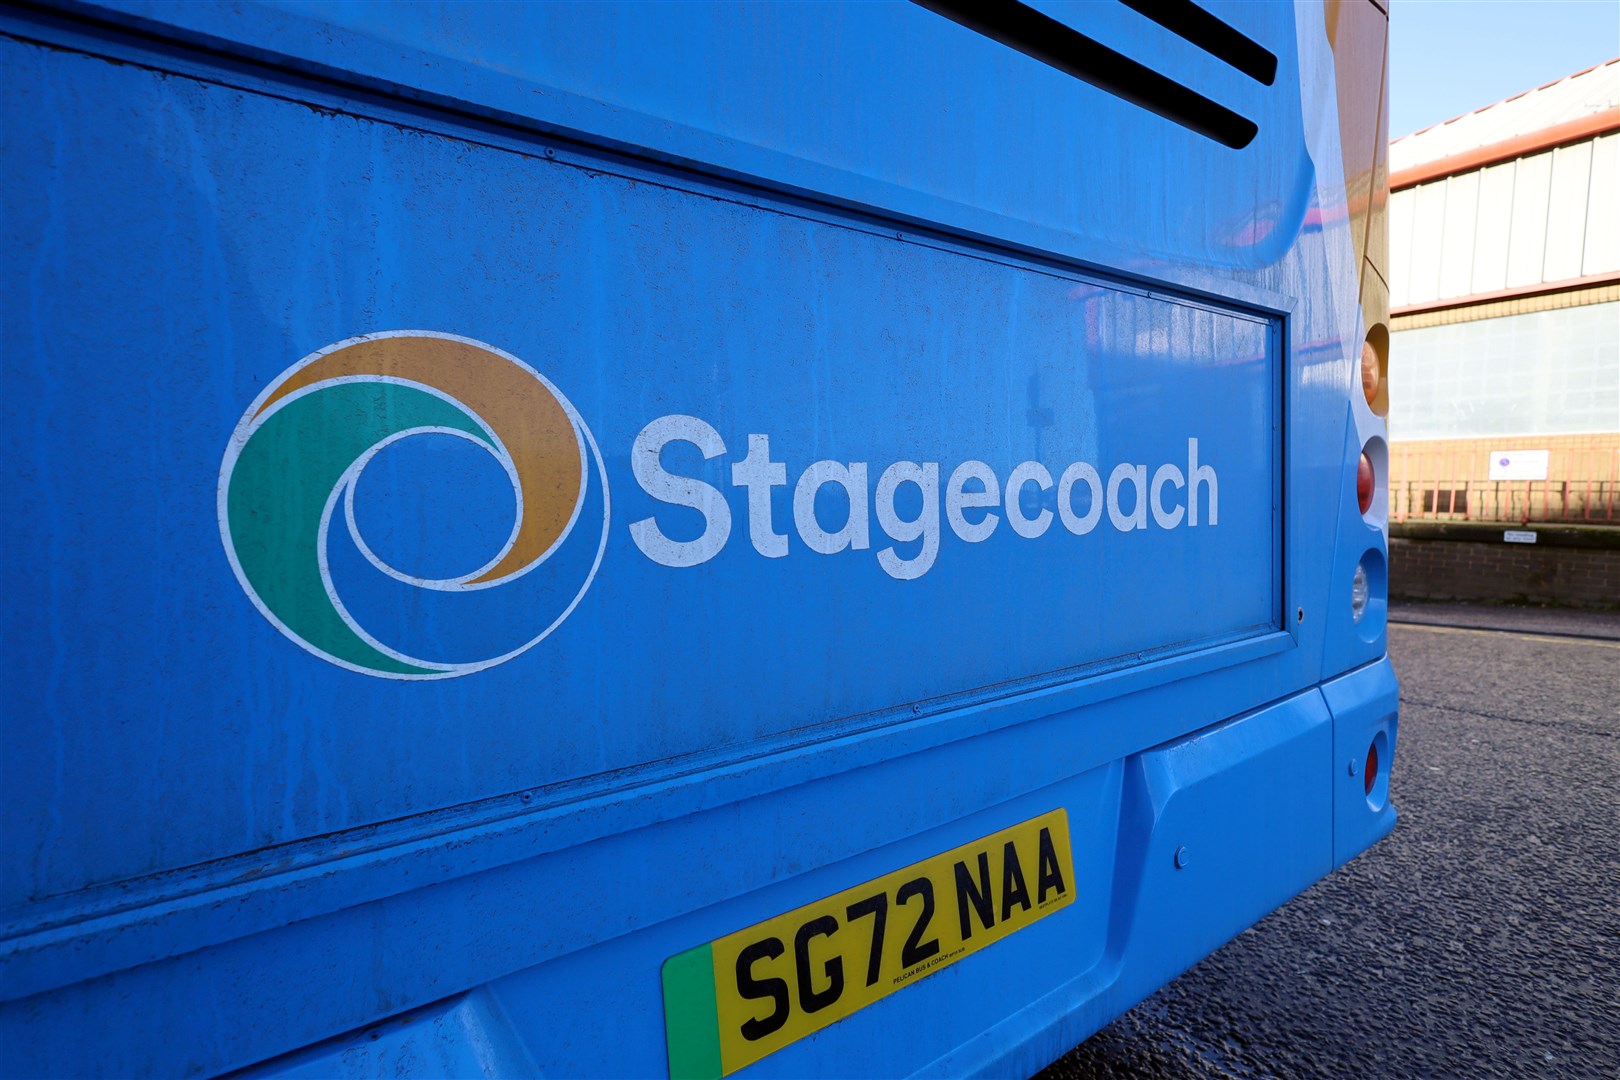 Stagecoach is to reinstate a Black Isle bus service after it was axed in error.